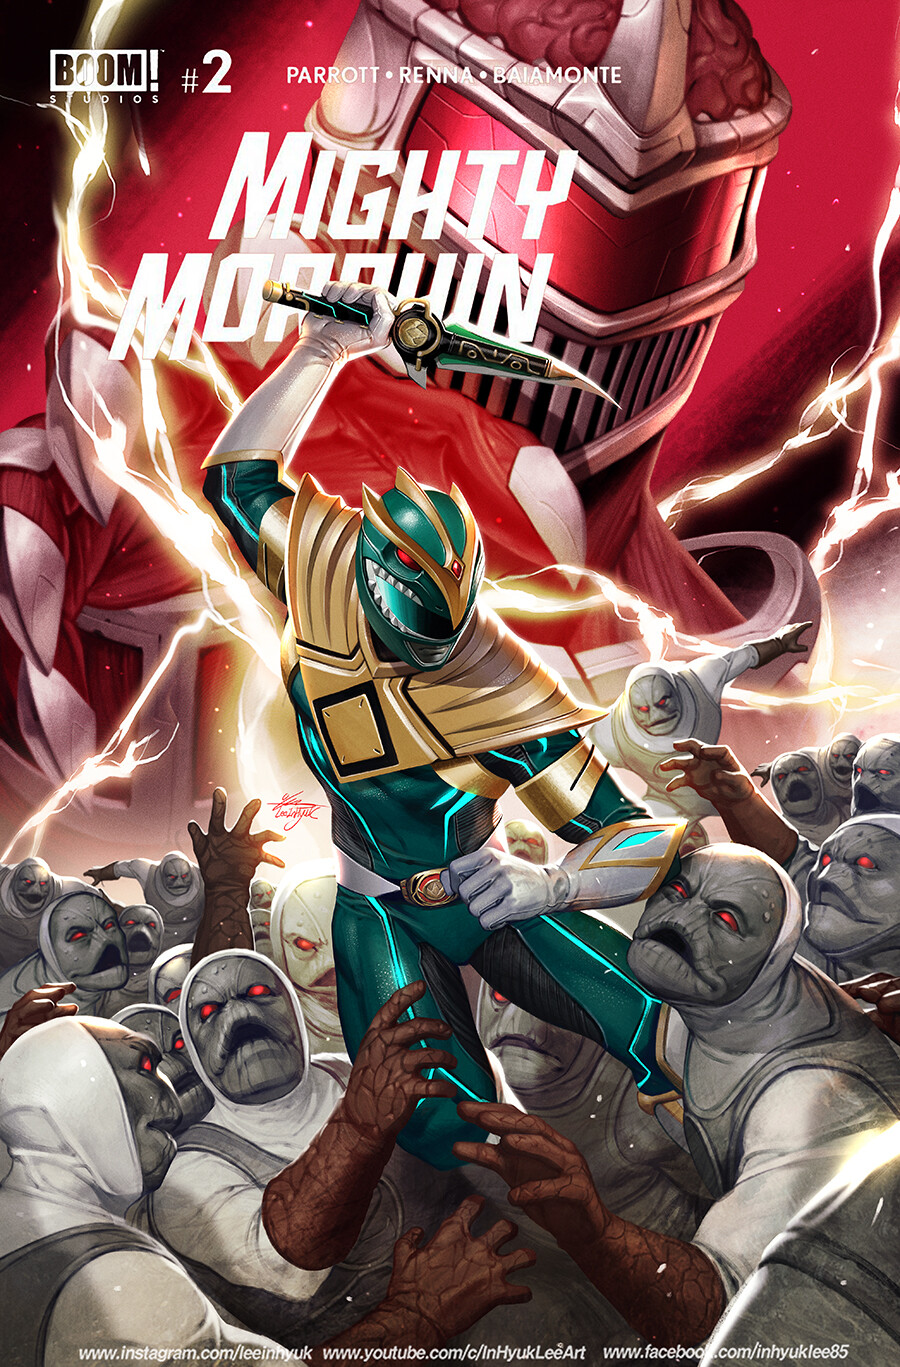 MIGHTY MORPHIN #2 Main cover